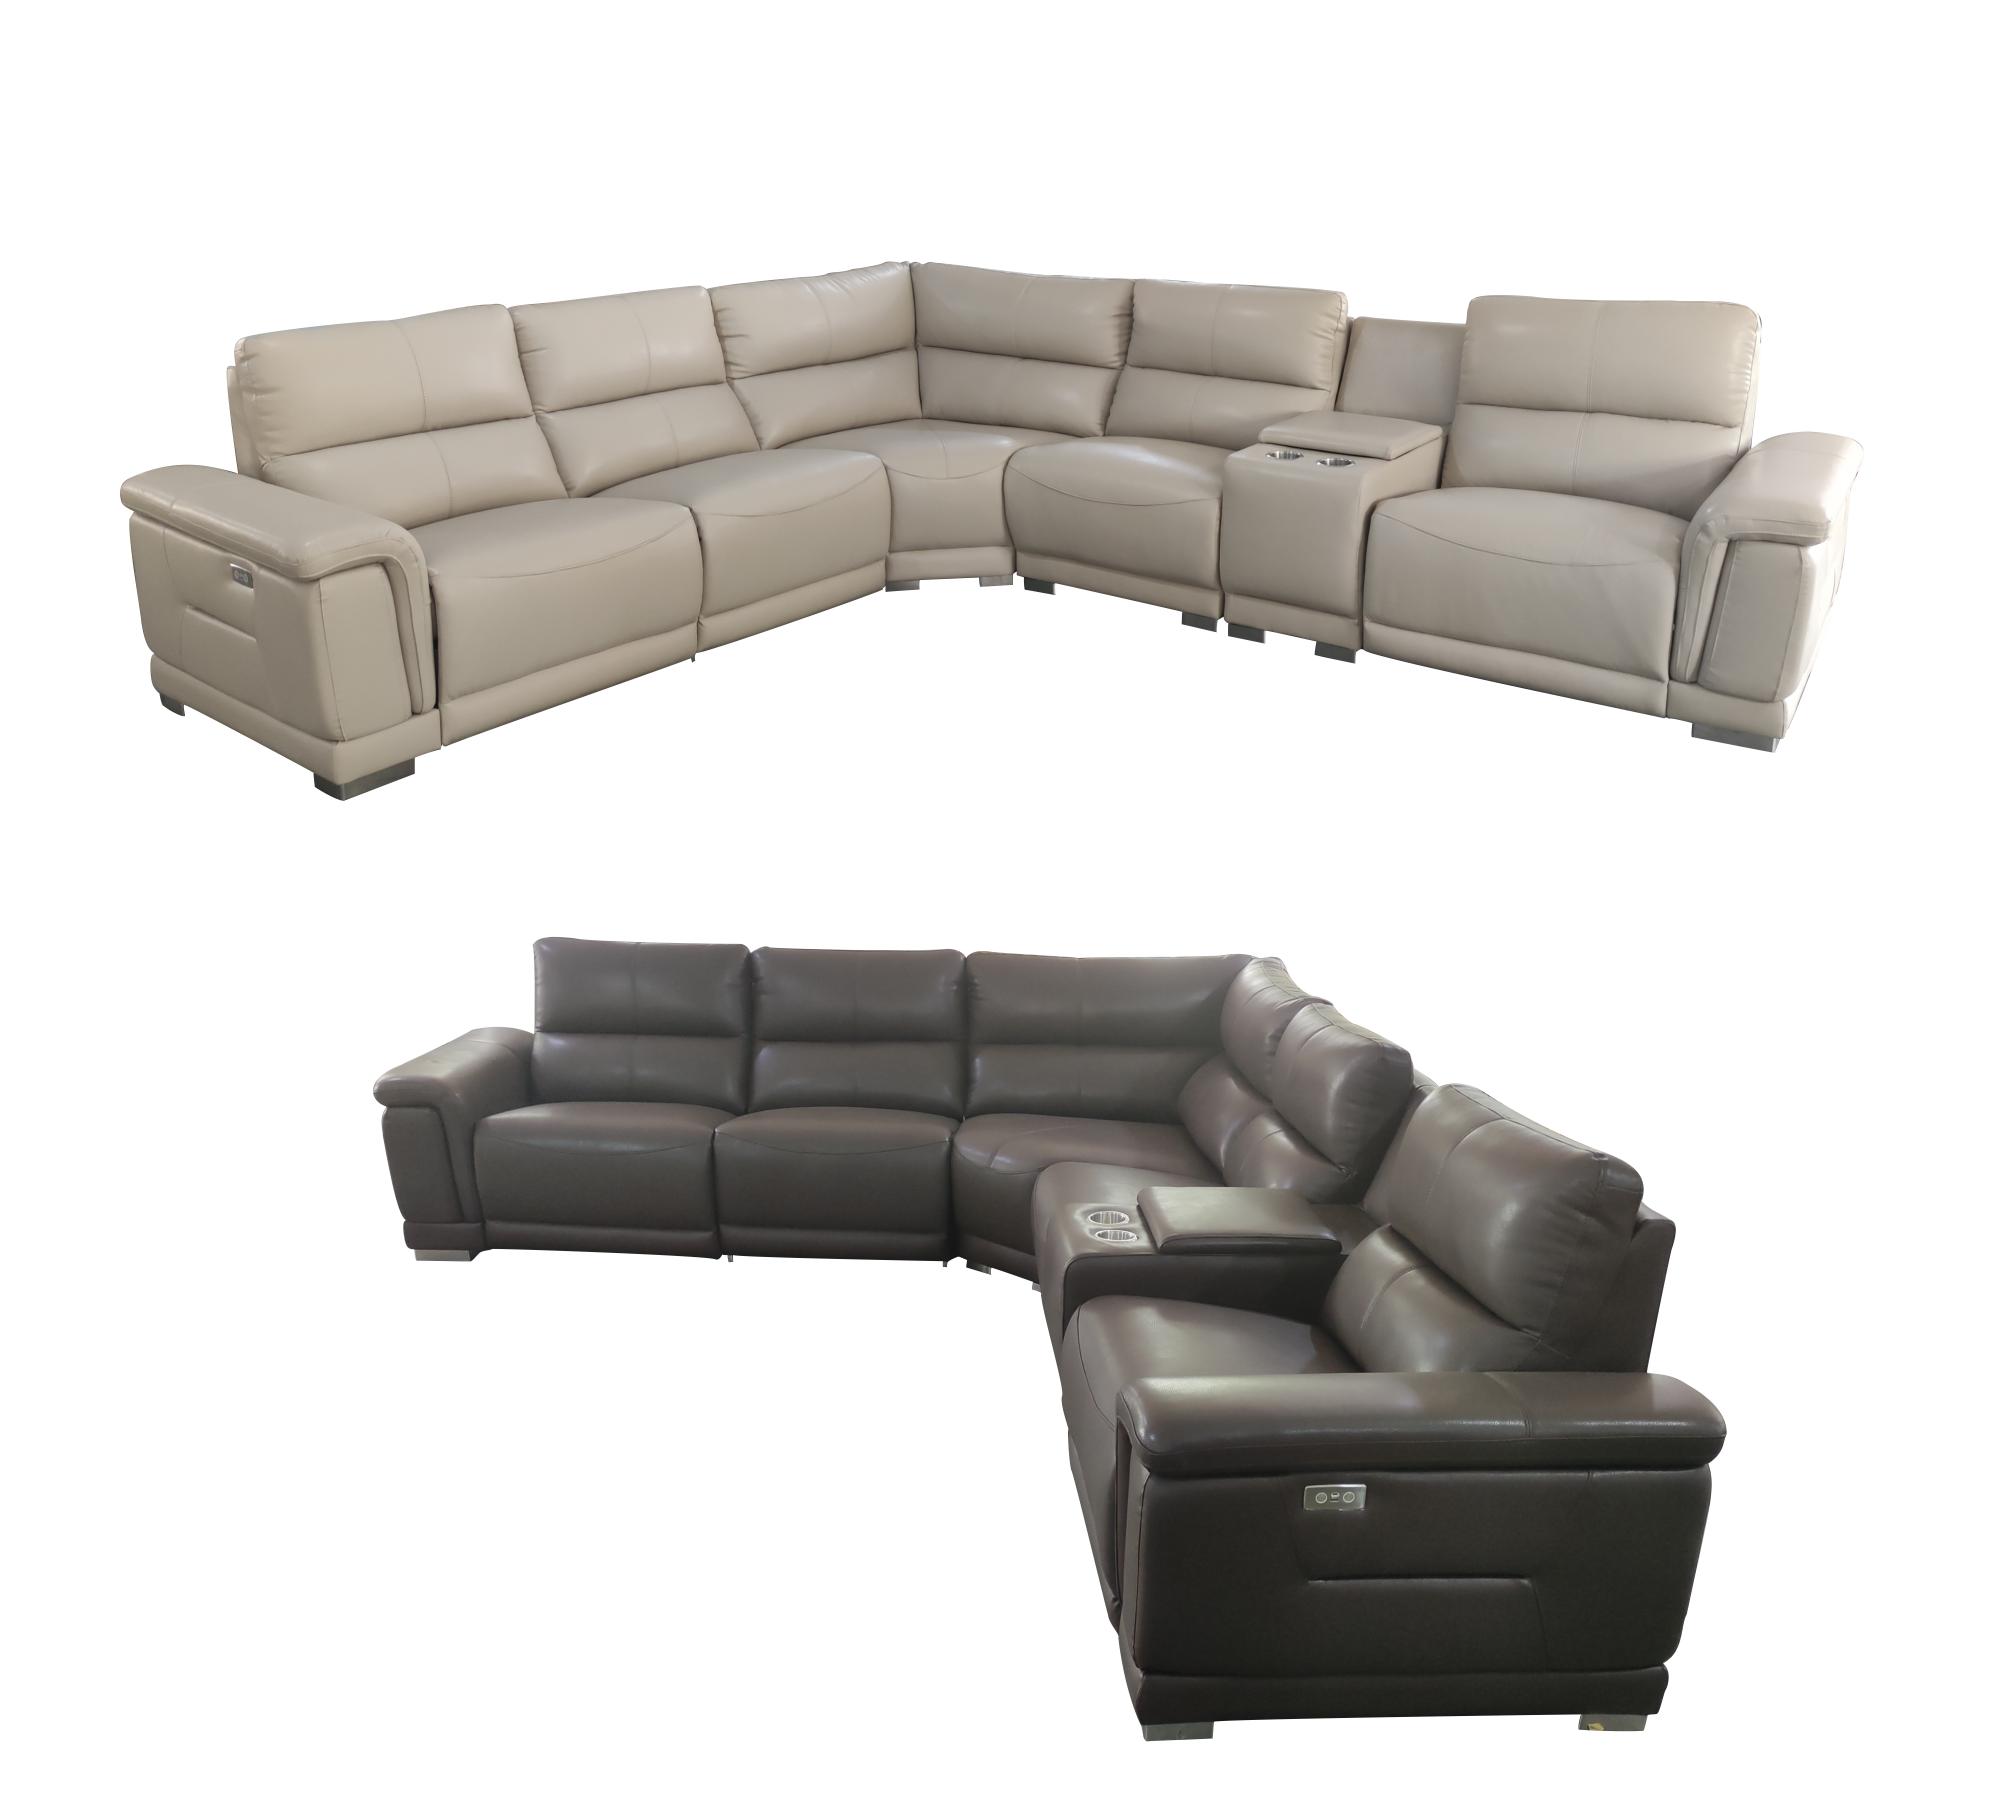 Brands Formerin Classic Living Room, Italy 2901 Sectional w/recliner